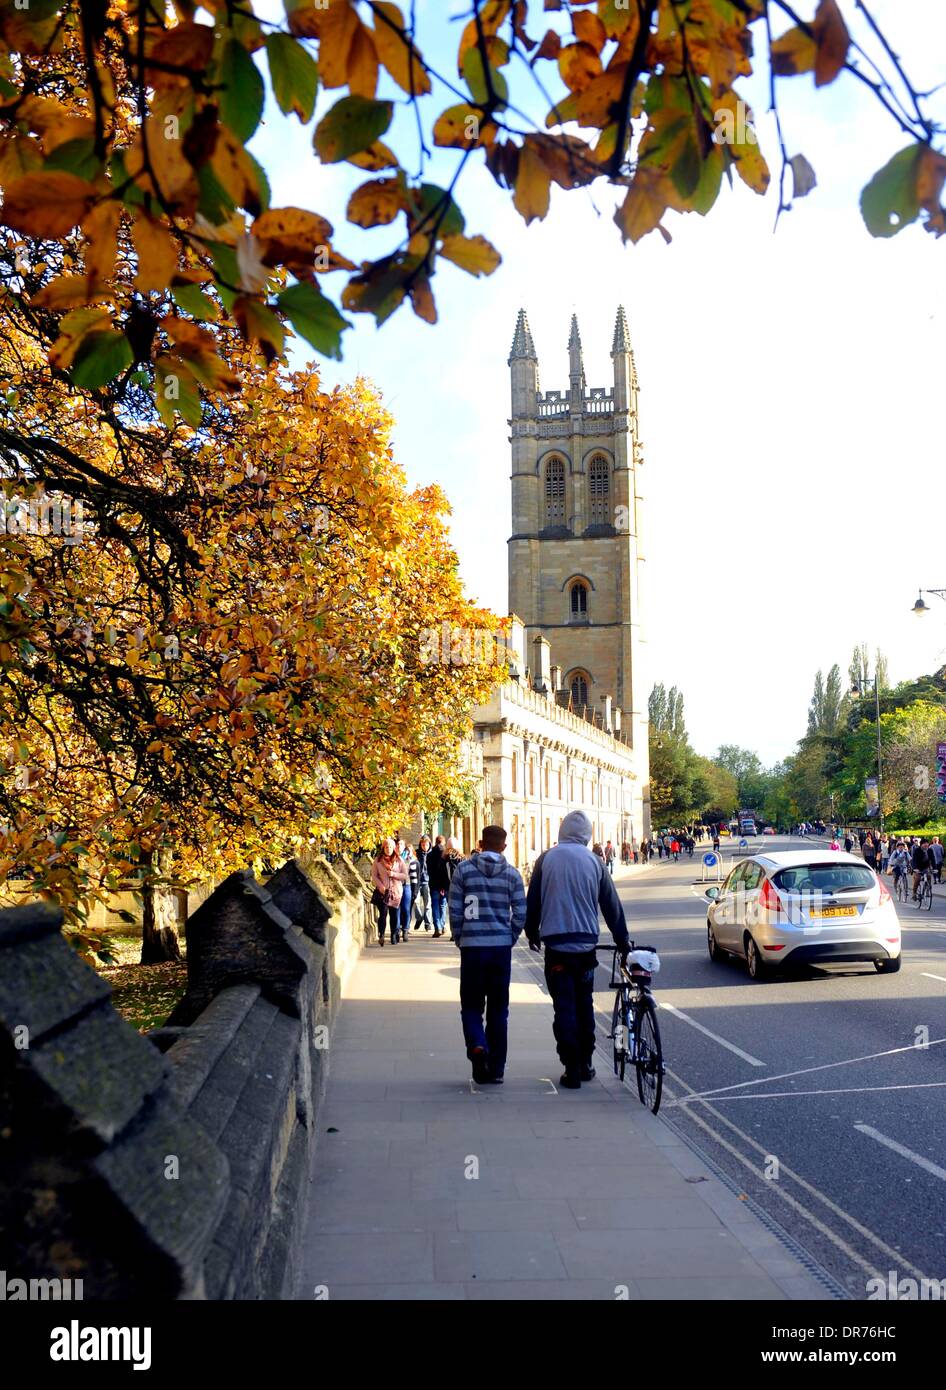 Travel dating website MissTravel.com says Oxford  the city of dreaming spires is one of the  5th most popular on the planet for a romantic Valentine’s Day break. Photo by Brian Jordan/Alamy Live News Stock Photo